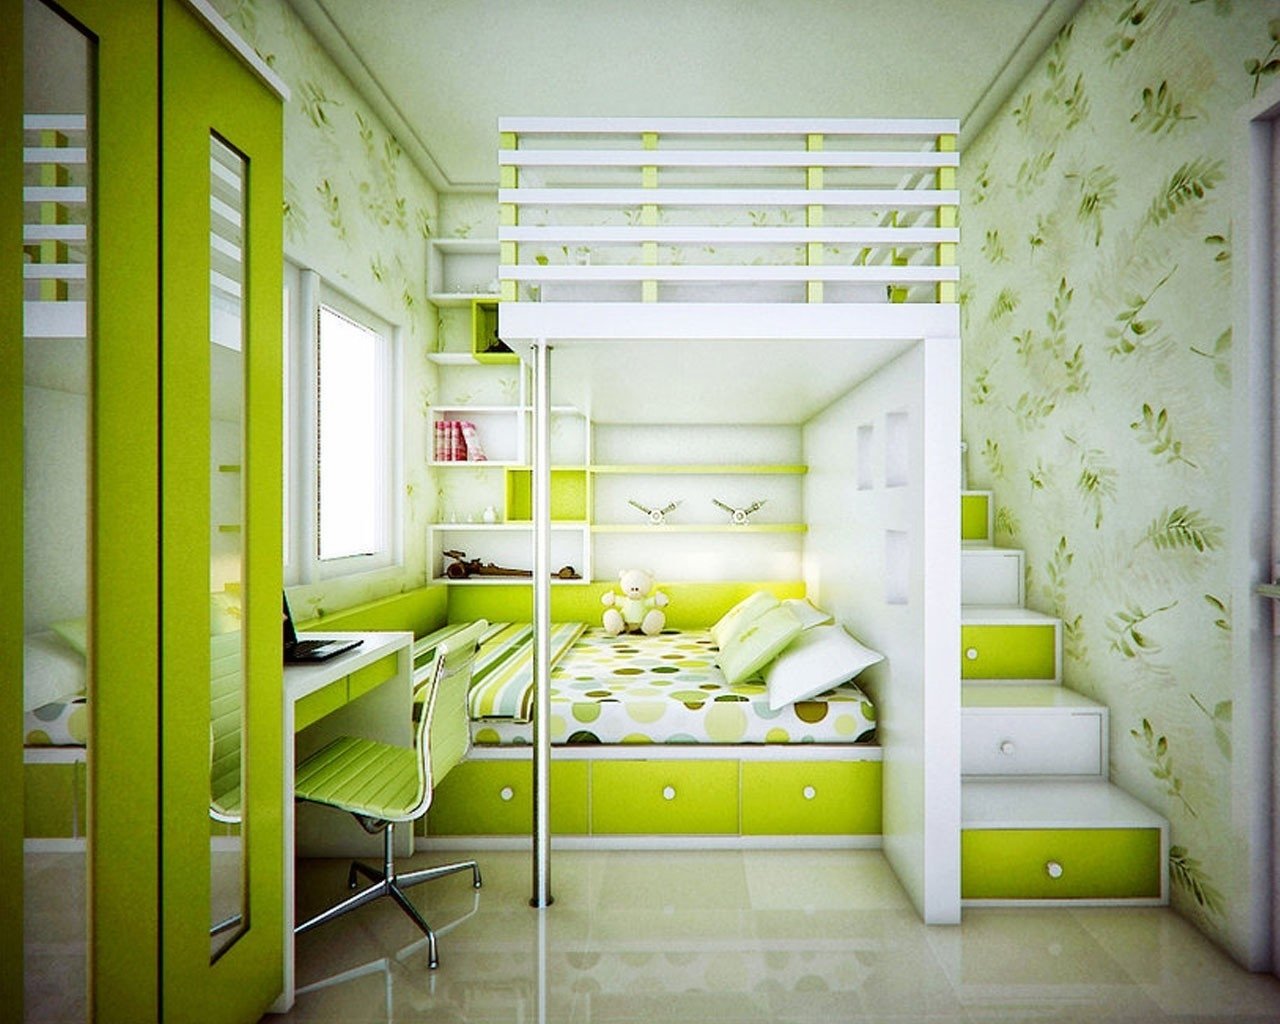 10 Attractive Bedroom Ideas For Small Rooms outstanding bedroom ideas for small rooms 23 kids room designs 2023